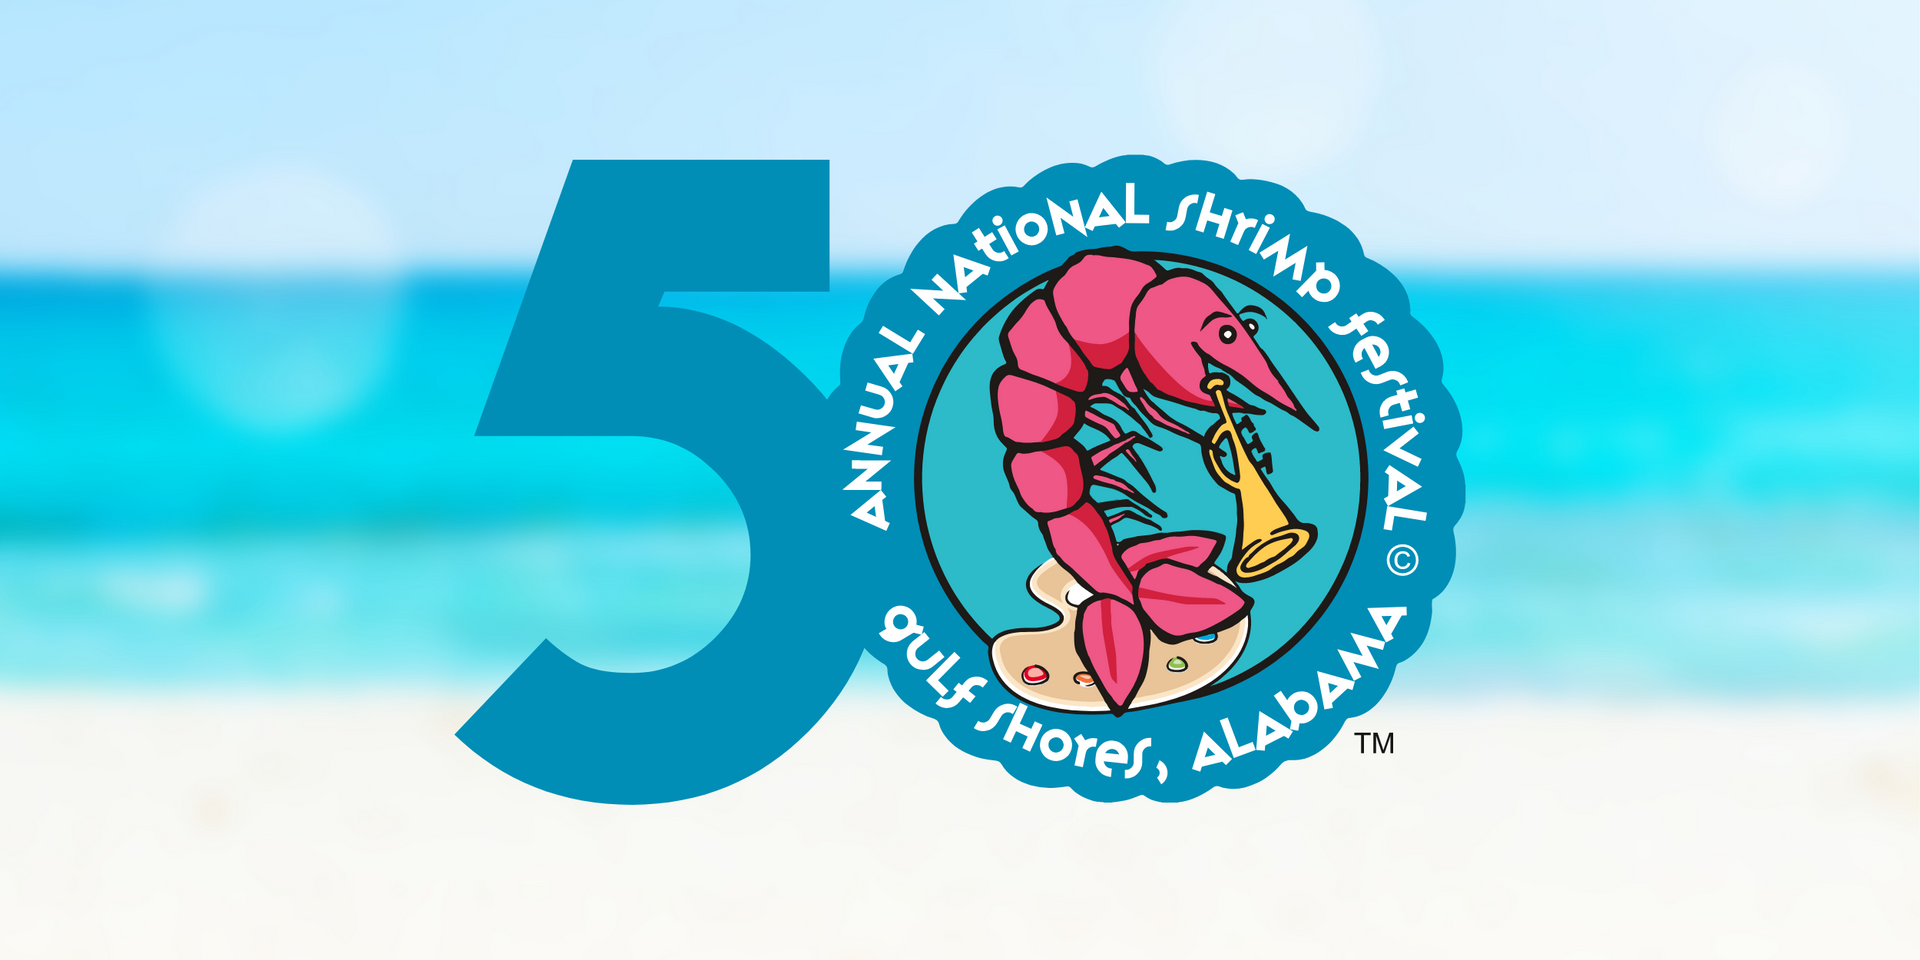 50th Annual National Shrimp Festival Calls for Vendors, Artists, and Entertainers Subtitle: Gulf Shores Gears Up for Milestone Festival with Online Applications and Exciting